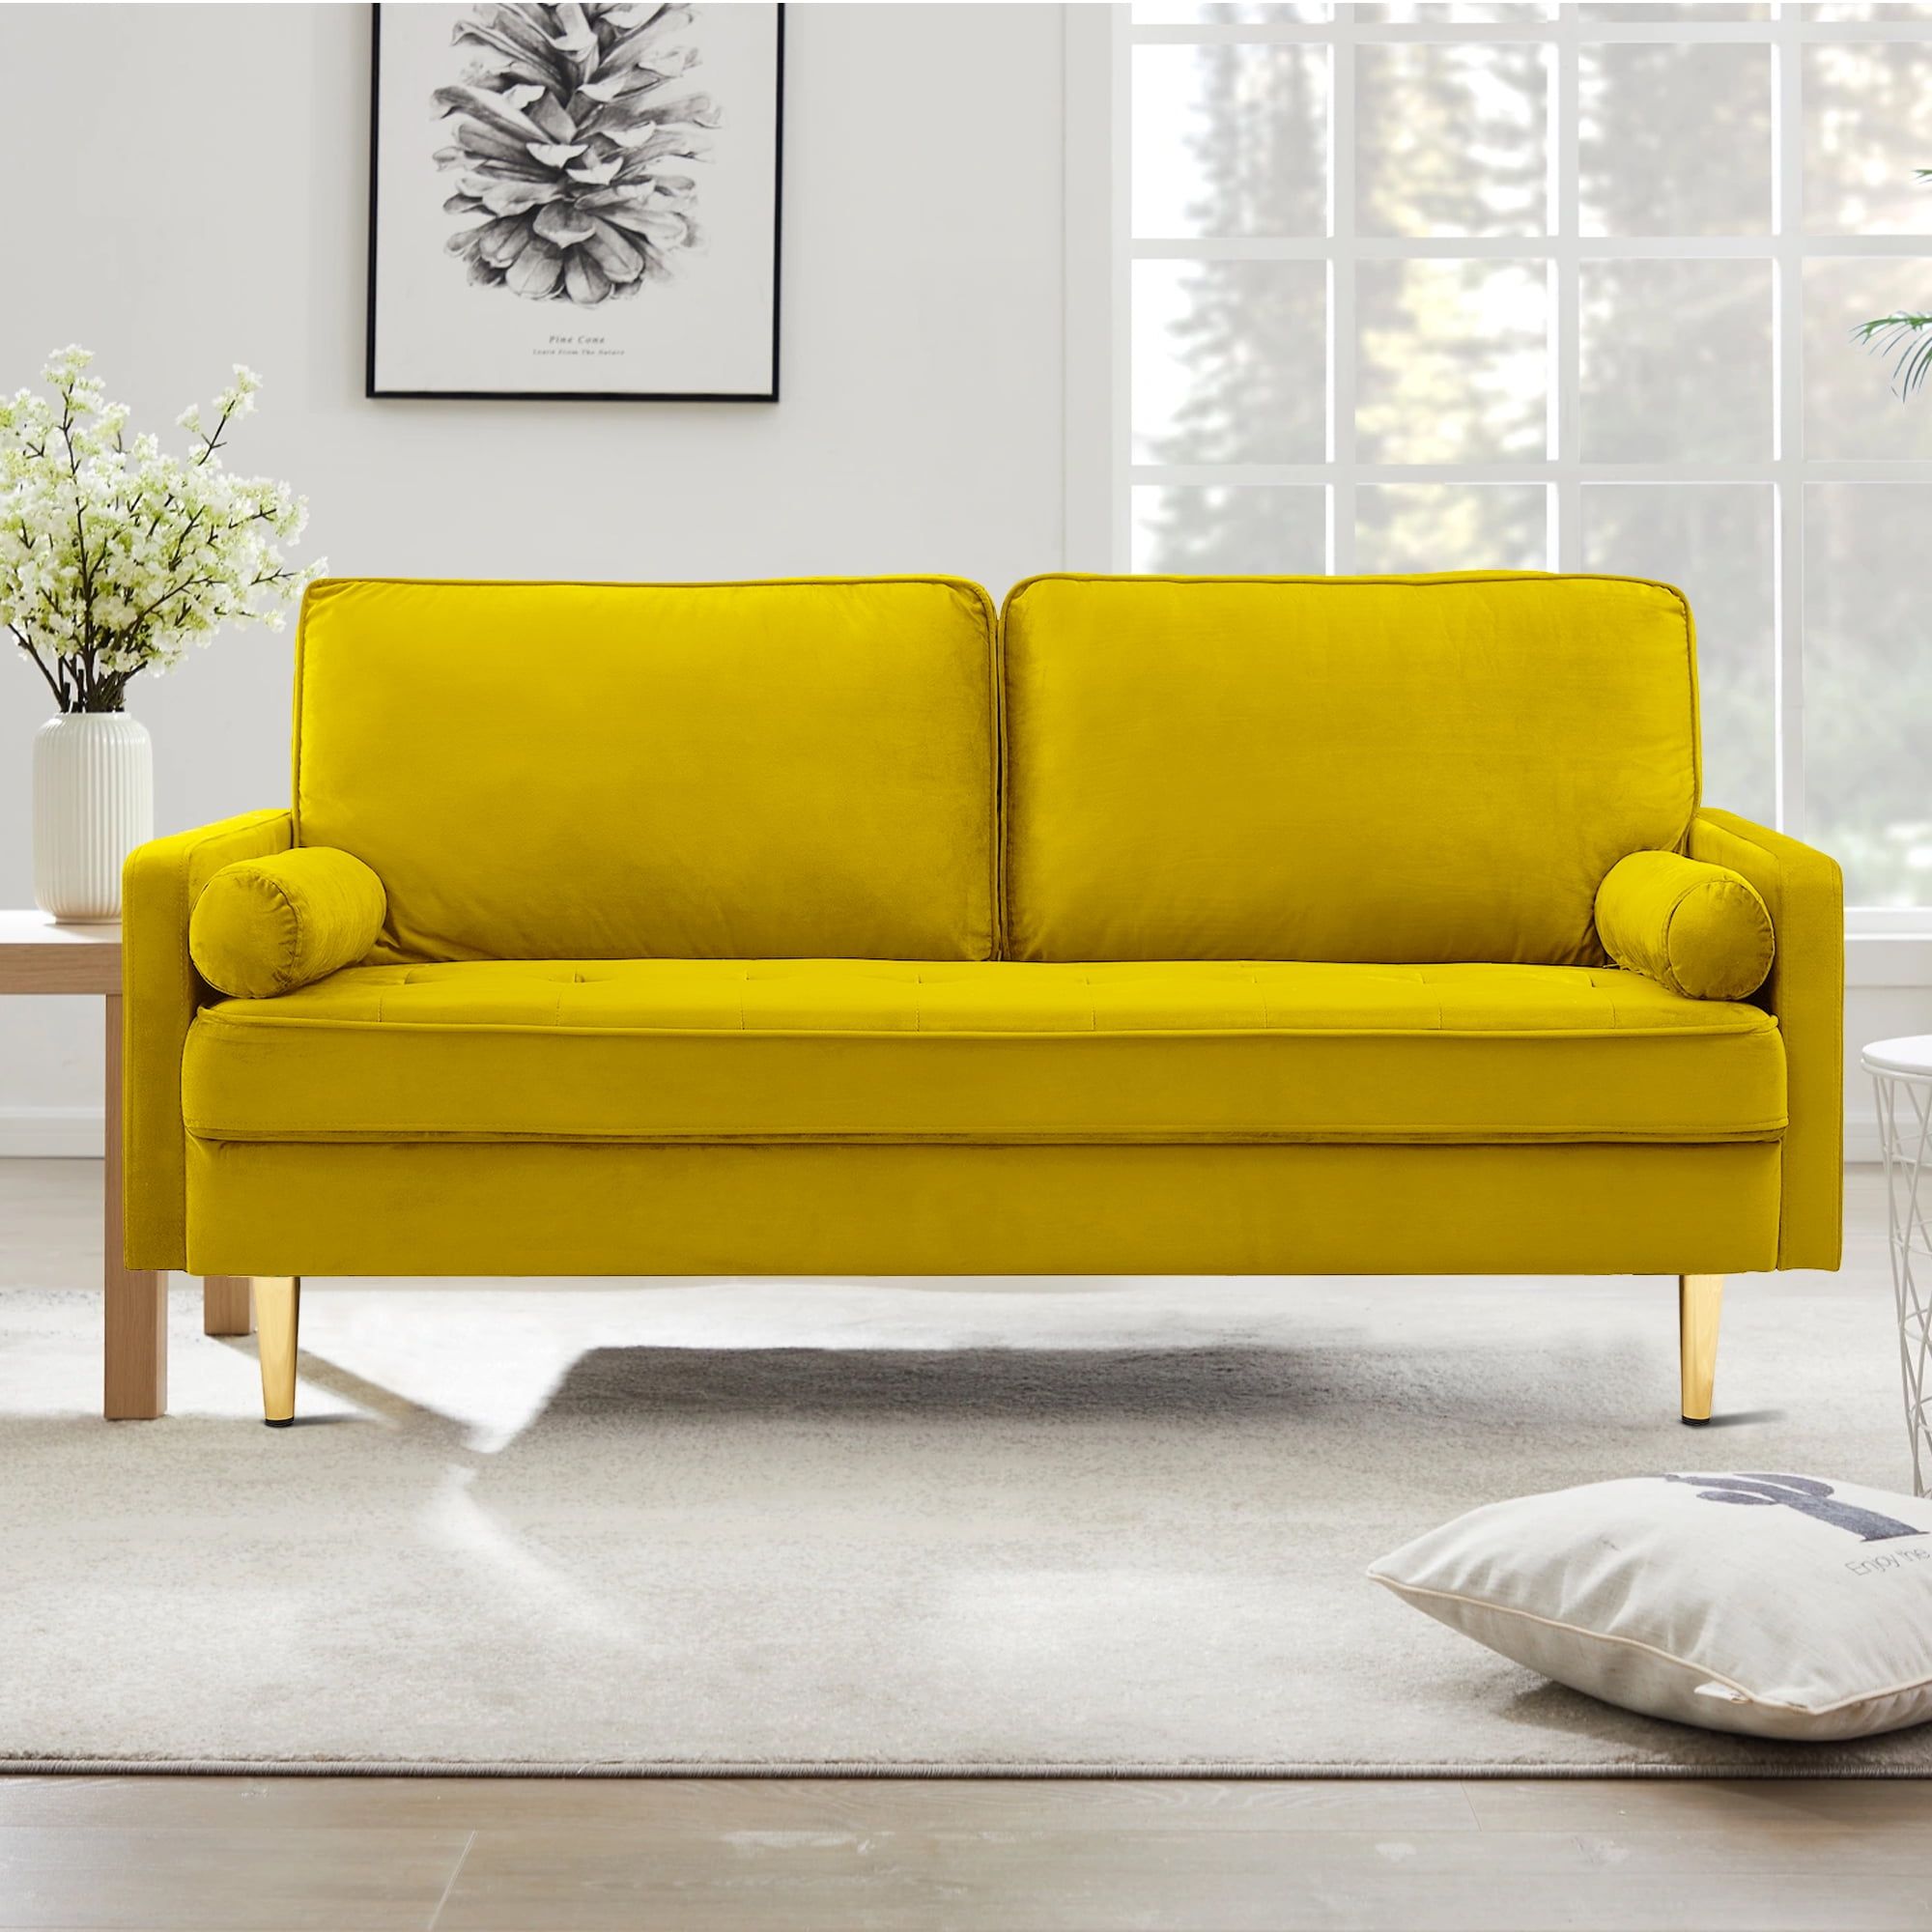 Kowilk Velvet Loveseat Sofa, 66.9'' Mid Century Modern Small Love Seats  With 2 Pillows & Golden Legs Comfy Couch For Living Room, Upholstered 2  Seater Sofa For Small Apartment ,yellow – Walmart Regarding Small Love Seats In Velvet (Photo 7 of 15)